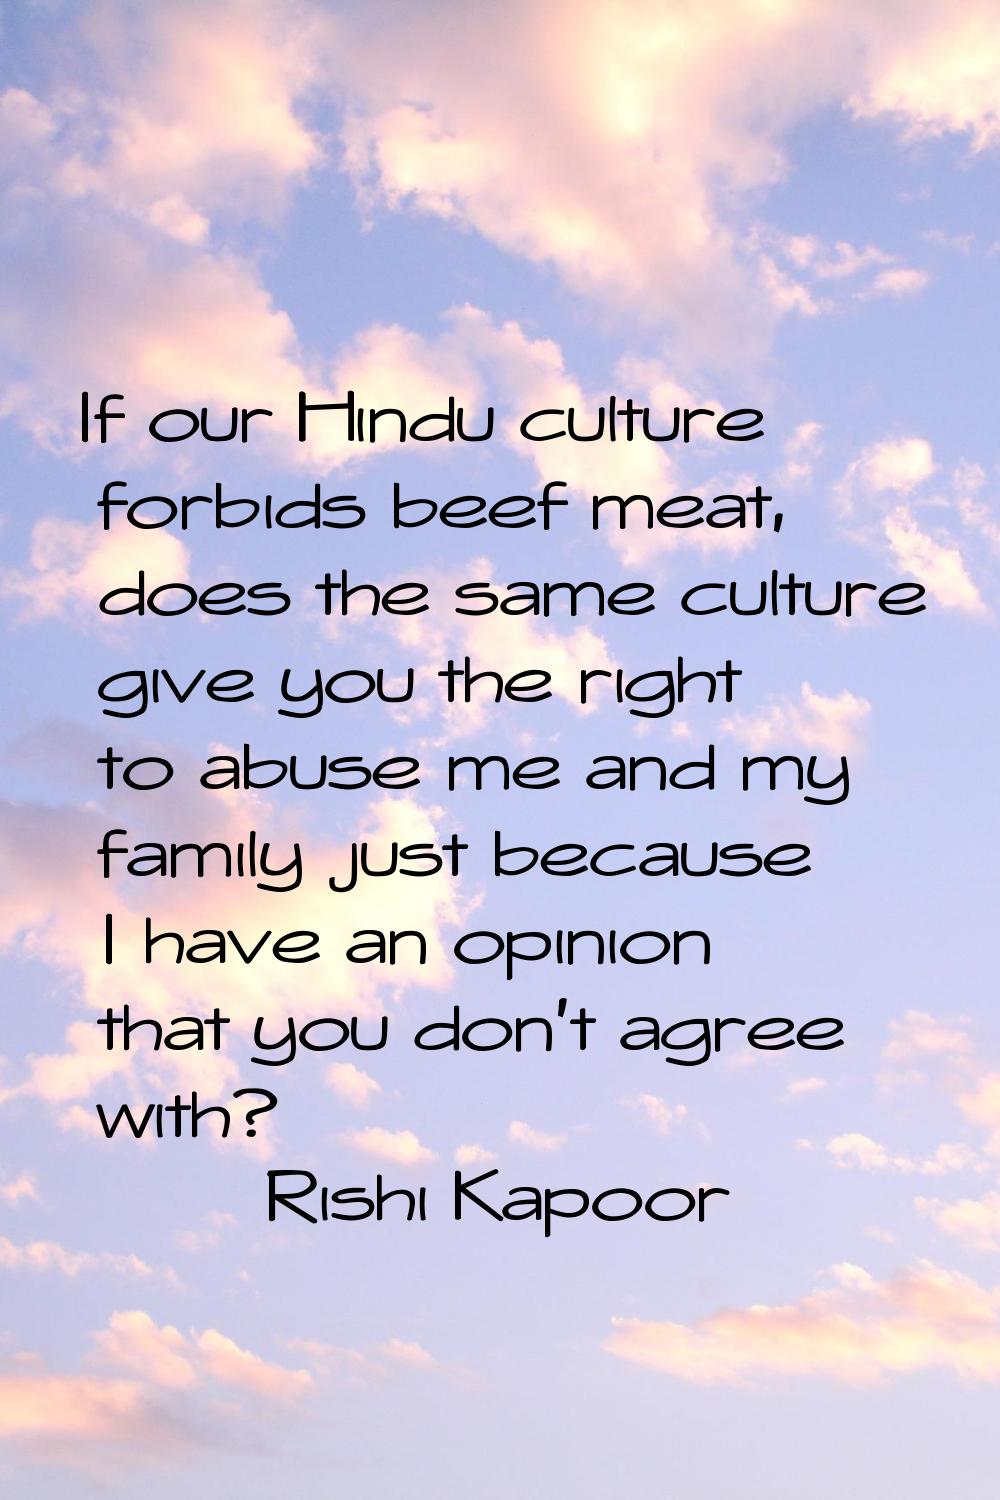 If our Hindu culture forbids beef meat, does the same culture give you the right to abuse me and my